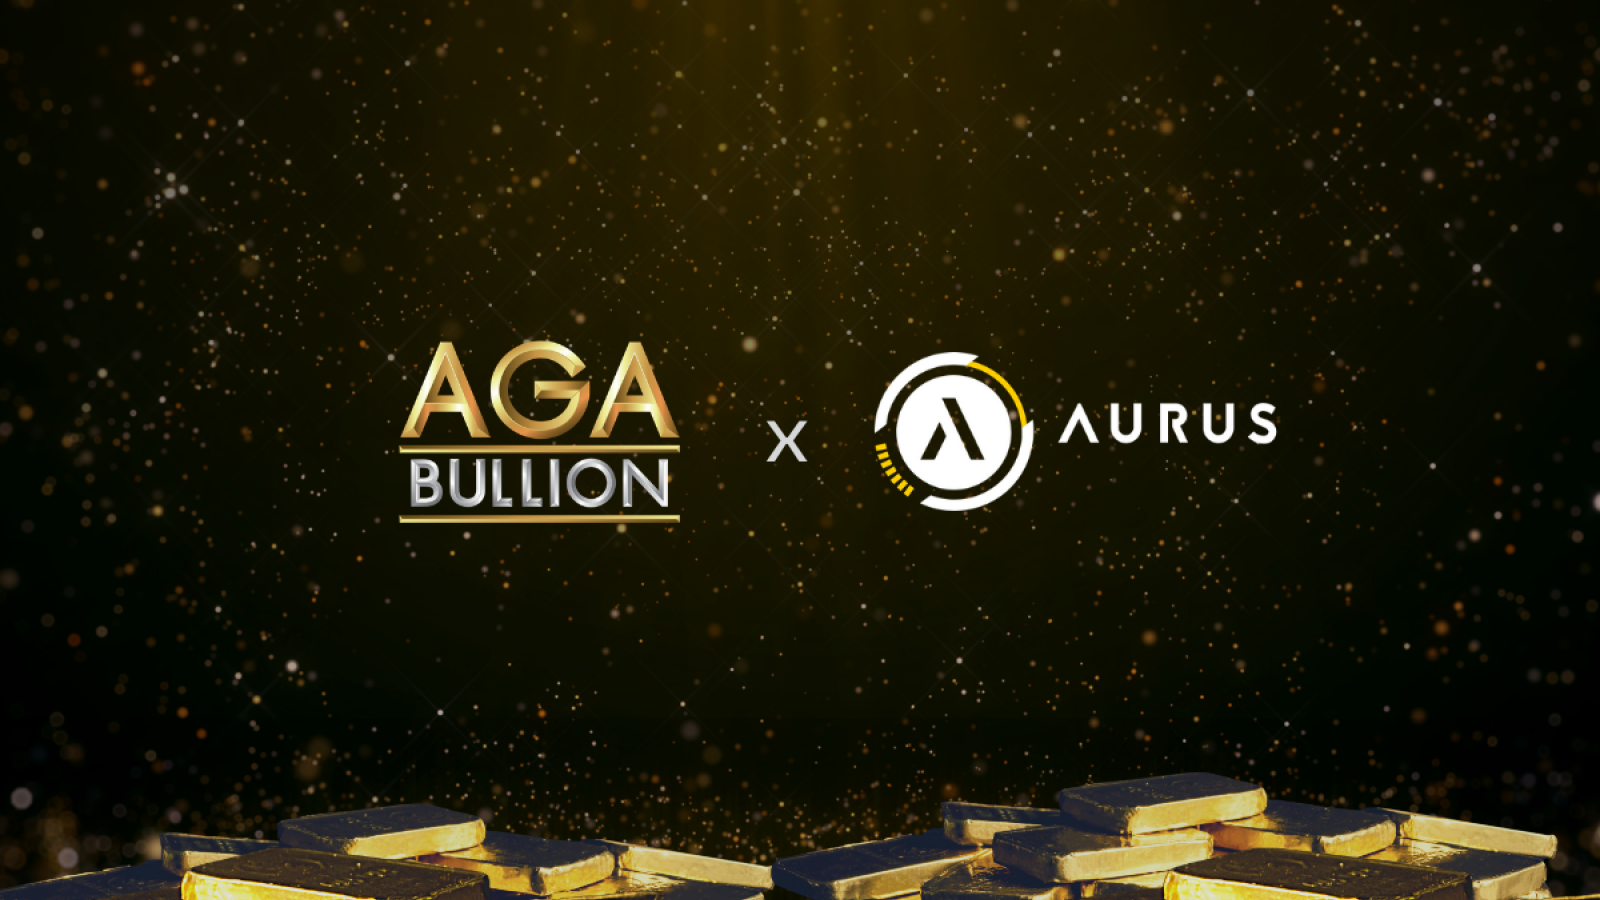 Gold Conglomerate AgaBullion Partners with Aurus Technologies to Offer Blockchain-Based Digital Gold in Turkey